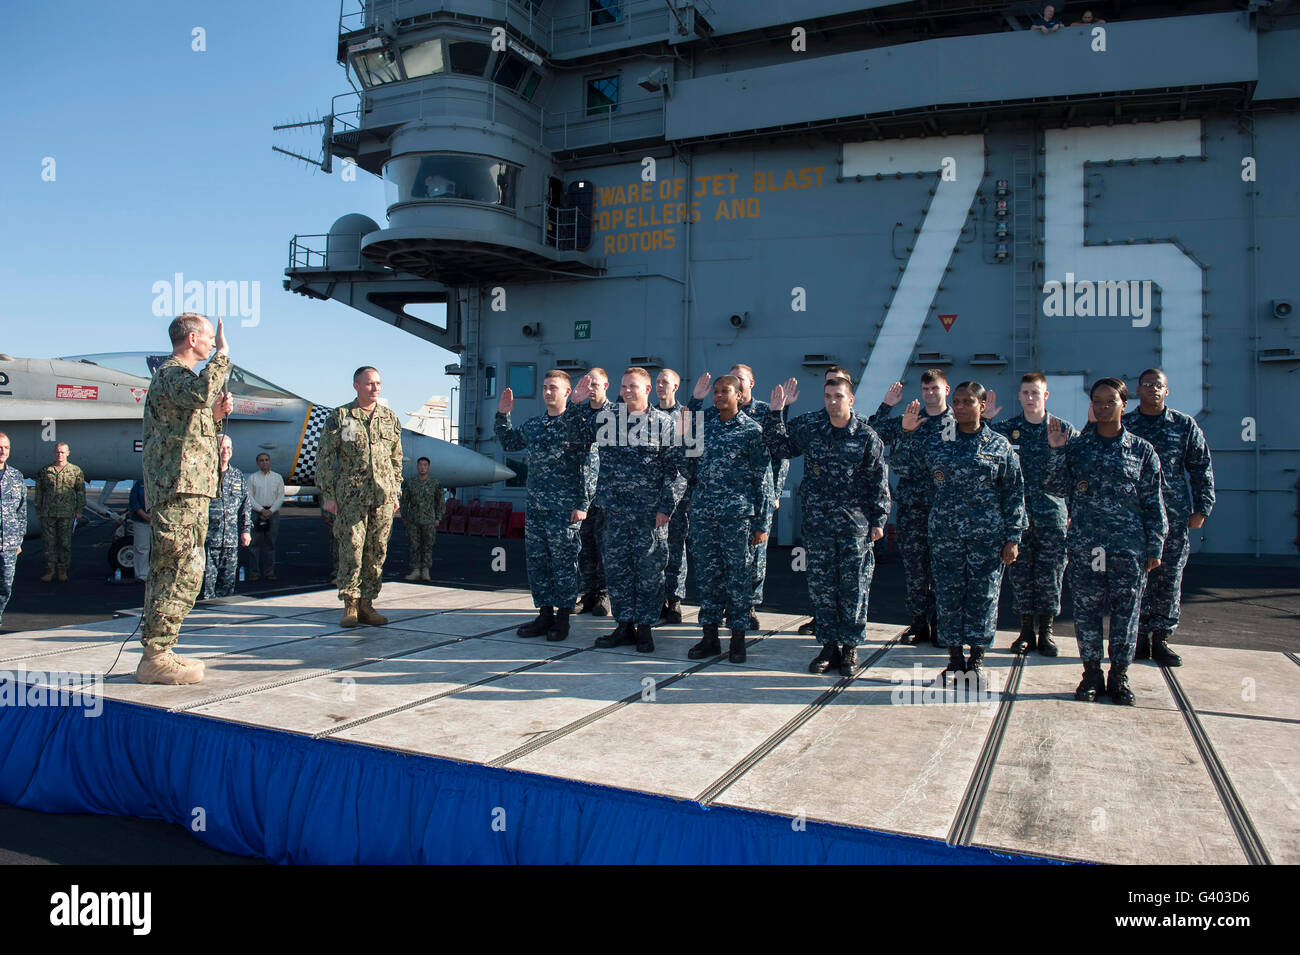 Chief of Naval Operations performs a re-enlistment ceremony. Stock Photo